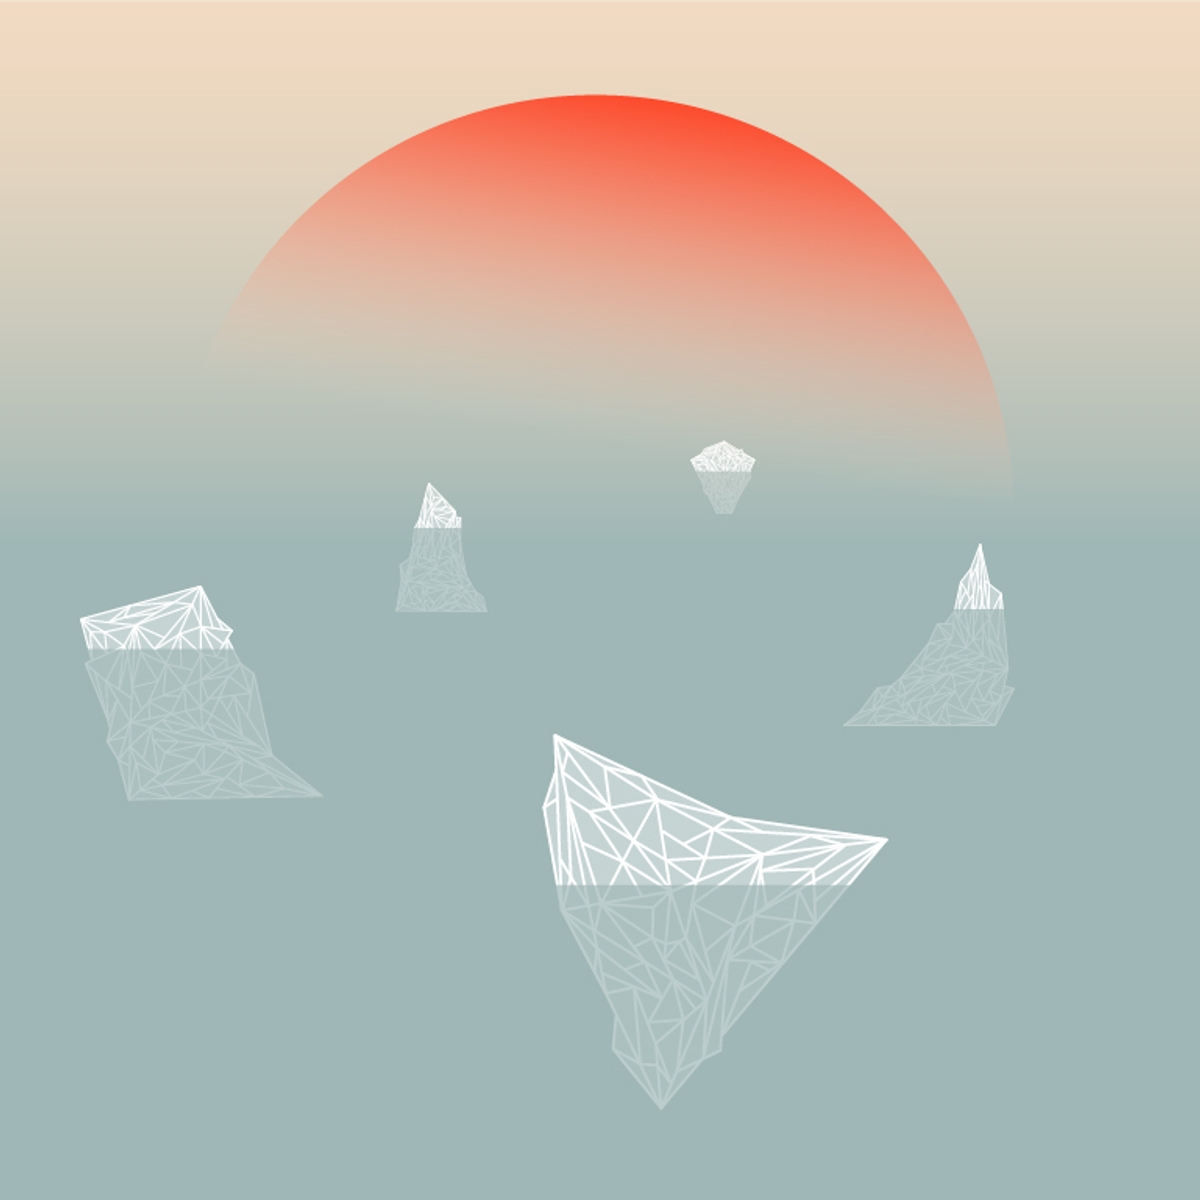 Illustration of the "Iceberg" chapters showing a grid of low poly contours of human postures.